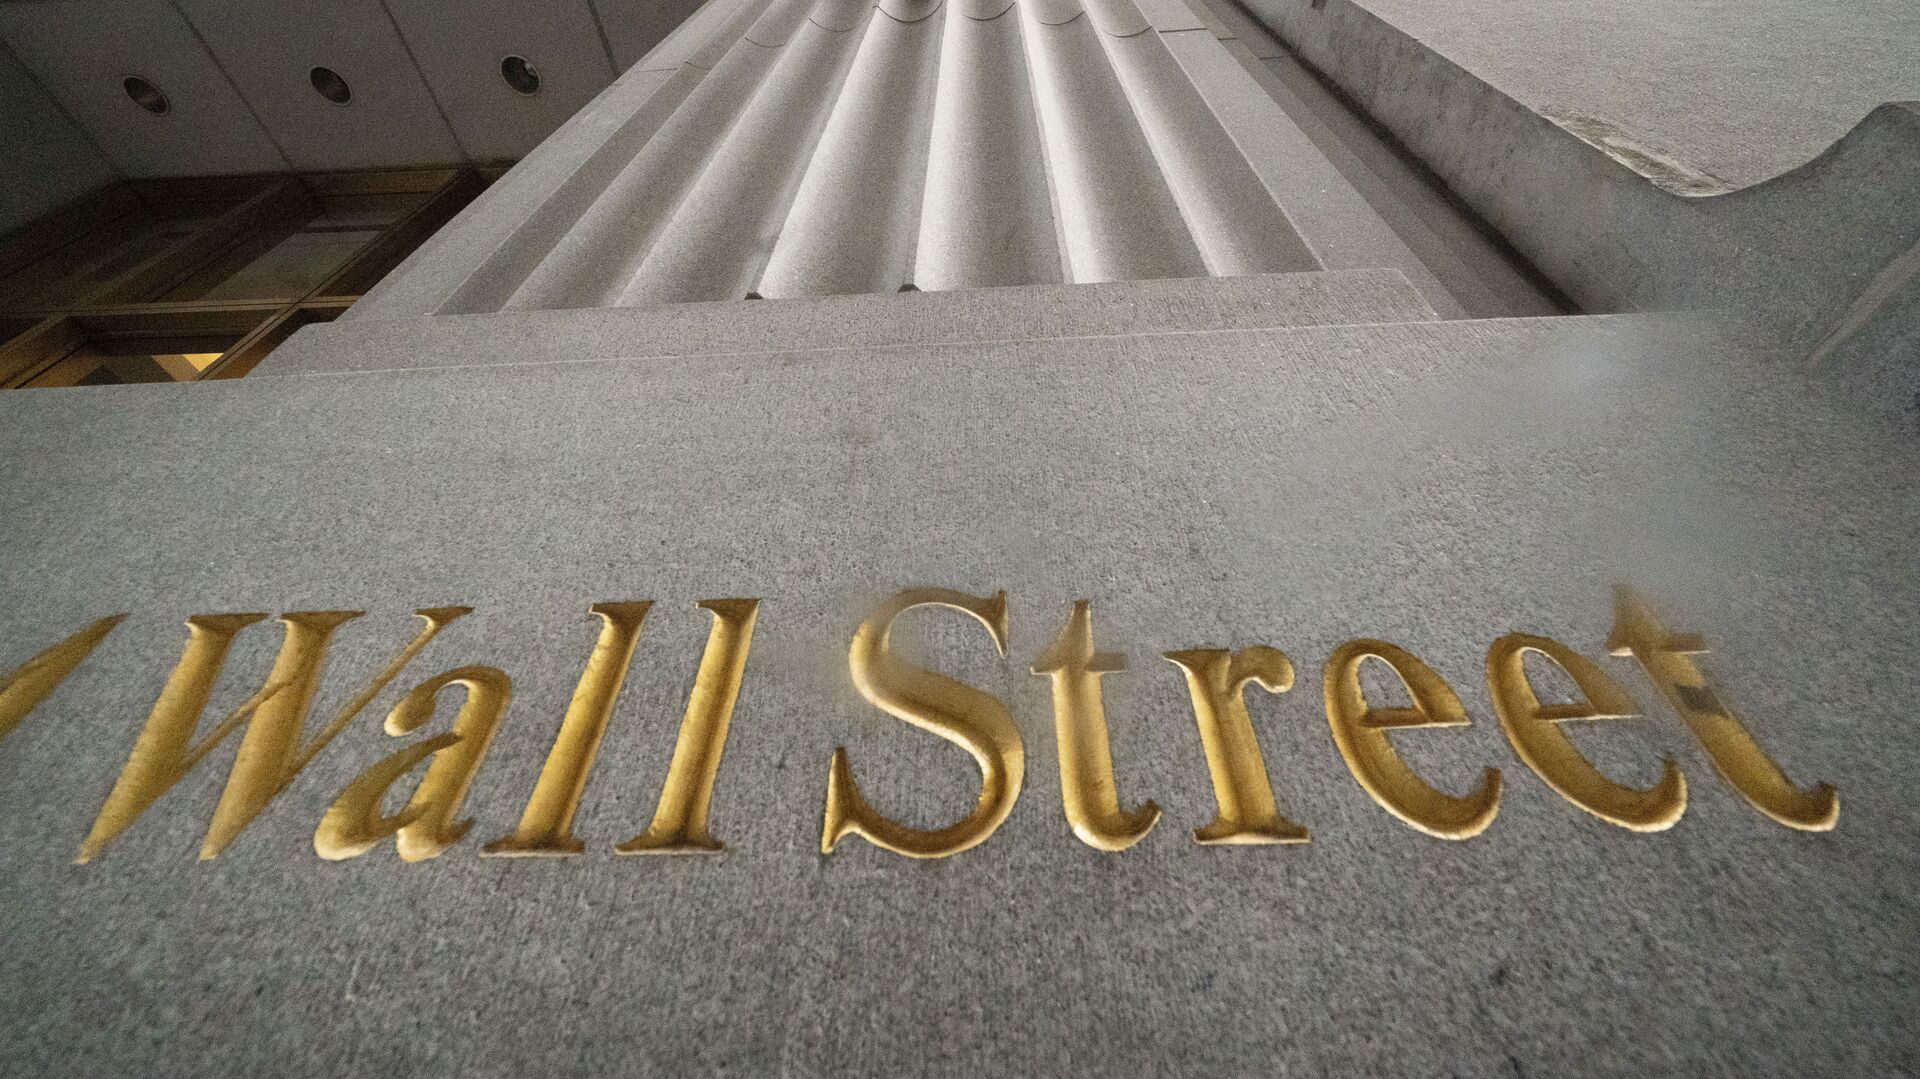 n this Nov. 5, 2020 file photo, a sign for Wall Street is carved in the side of a building. Stocks are easing lower in early trading on Wall Street, pulling major indexes slightly below the record highs they reached last week. - Sputnik International, 1920, 02.10.2021